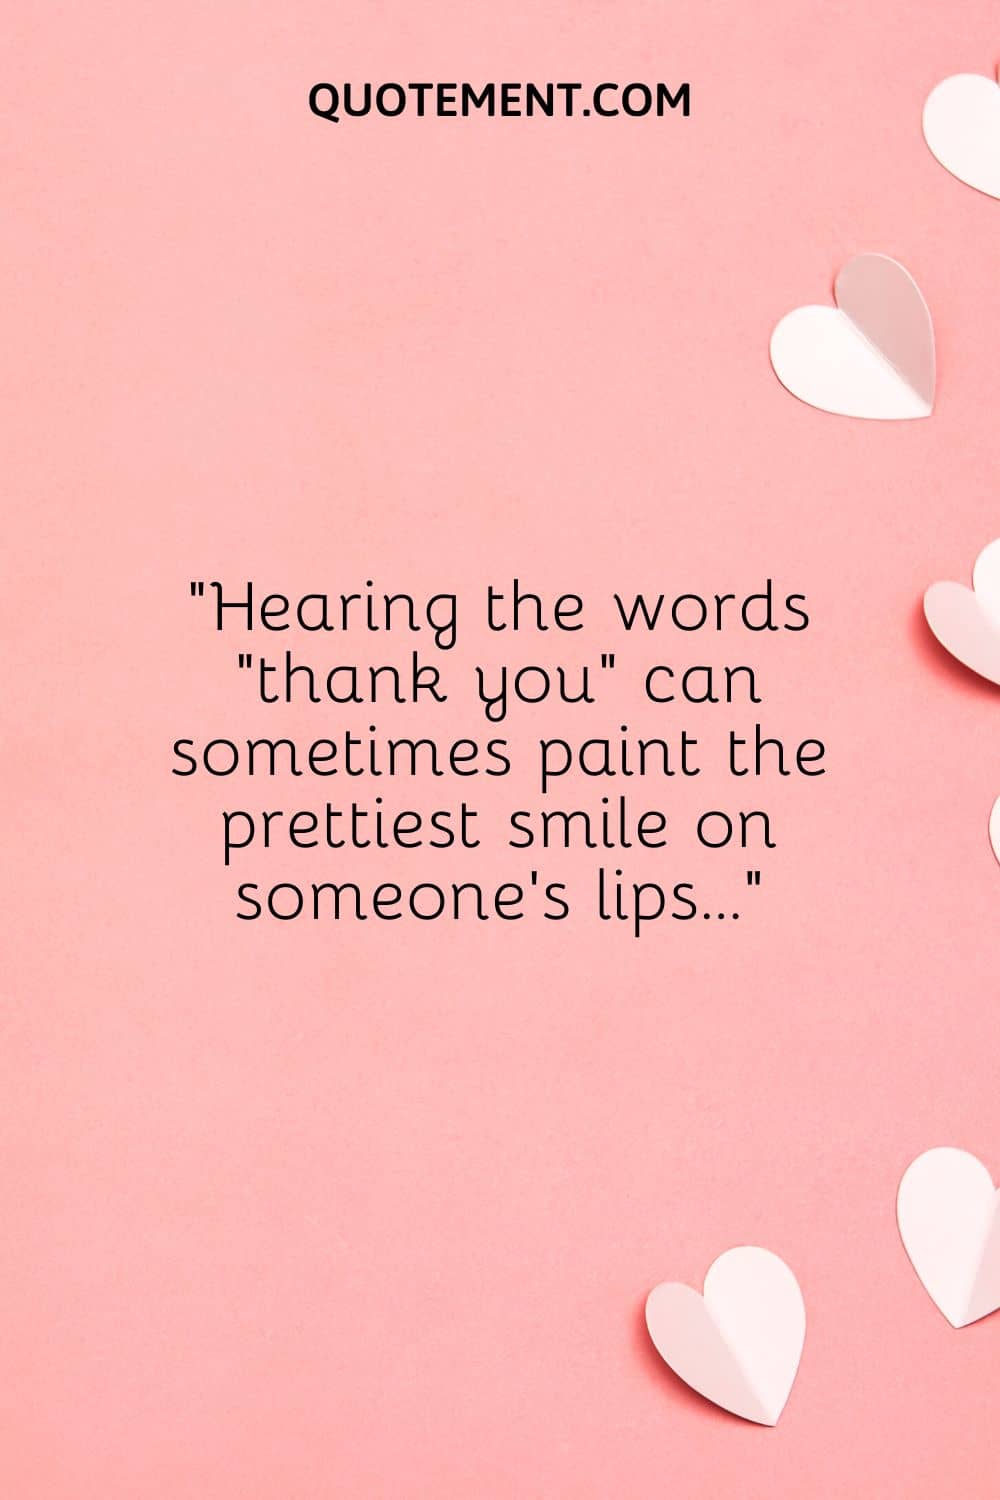 Hearing the words “thank you” can sometimes paint the prettiest smile on someone’s lips